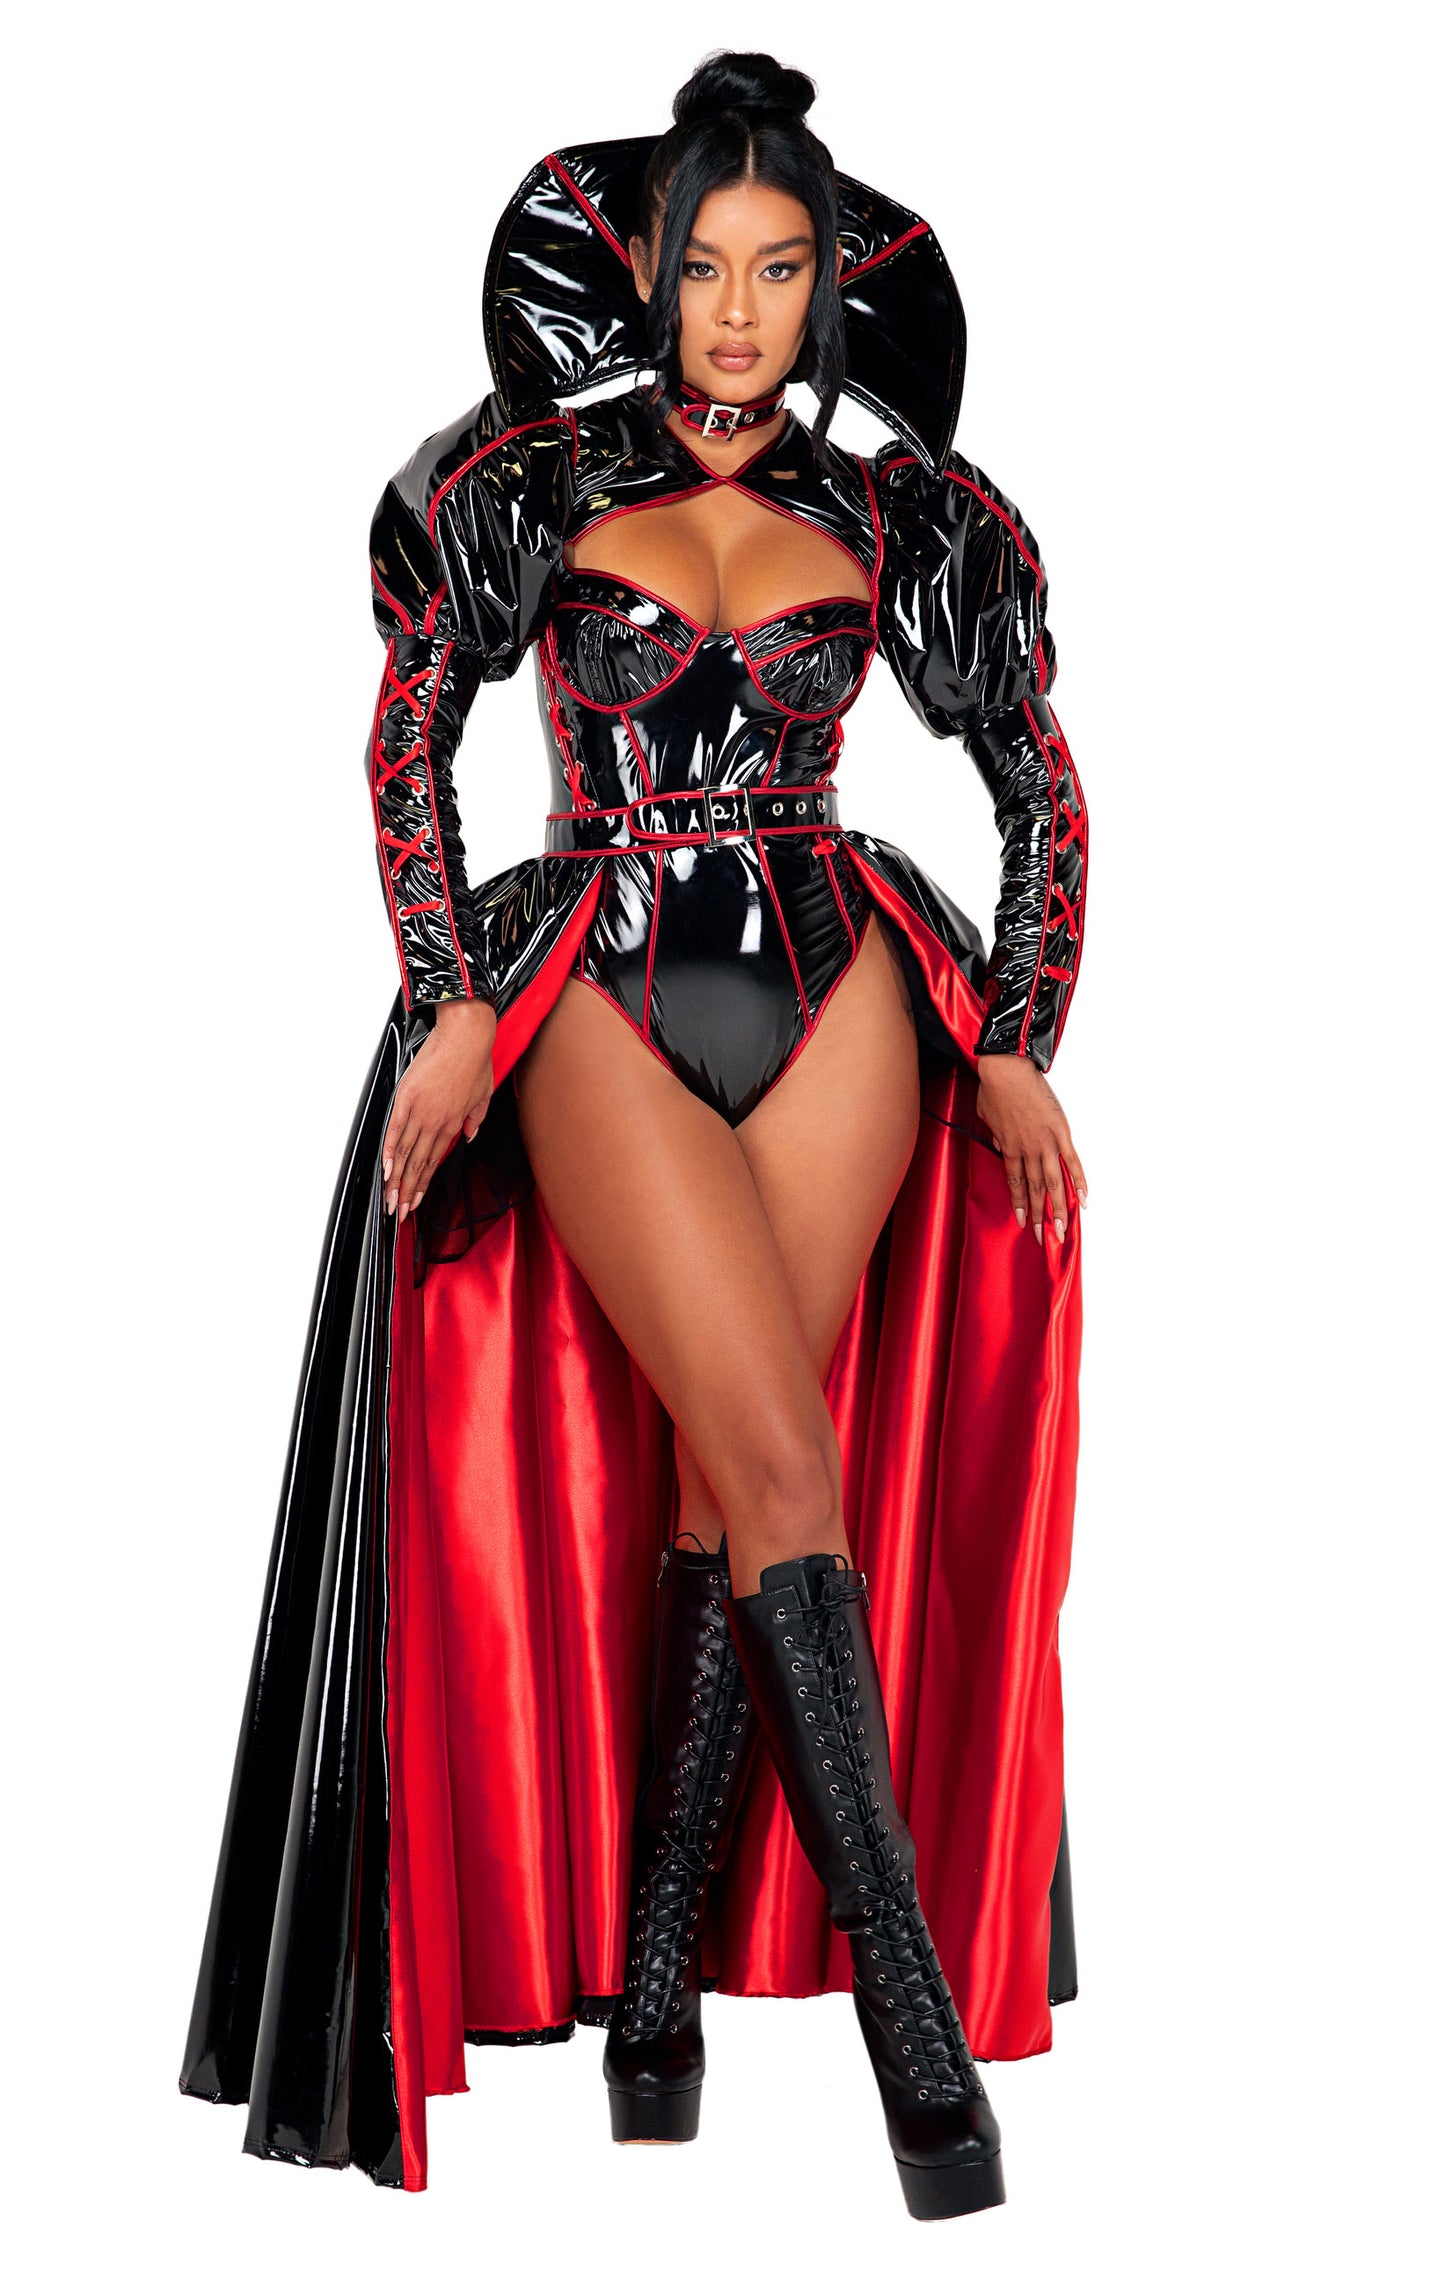 Underworld Evil Queen Vampire Costume by ROMA in Size S, M, or L